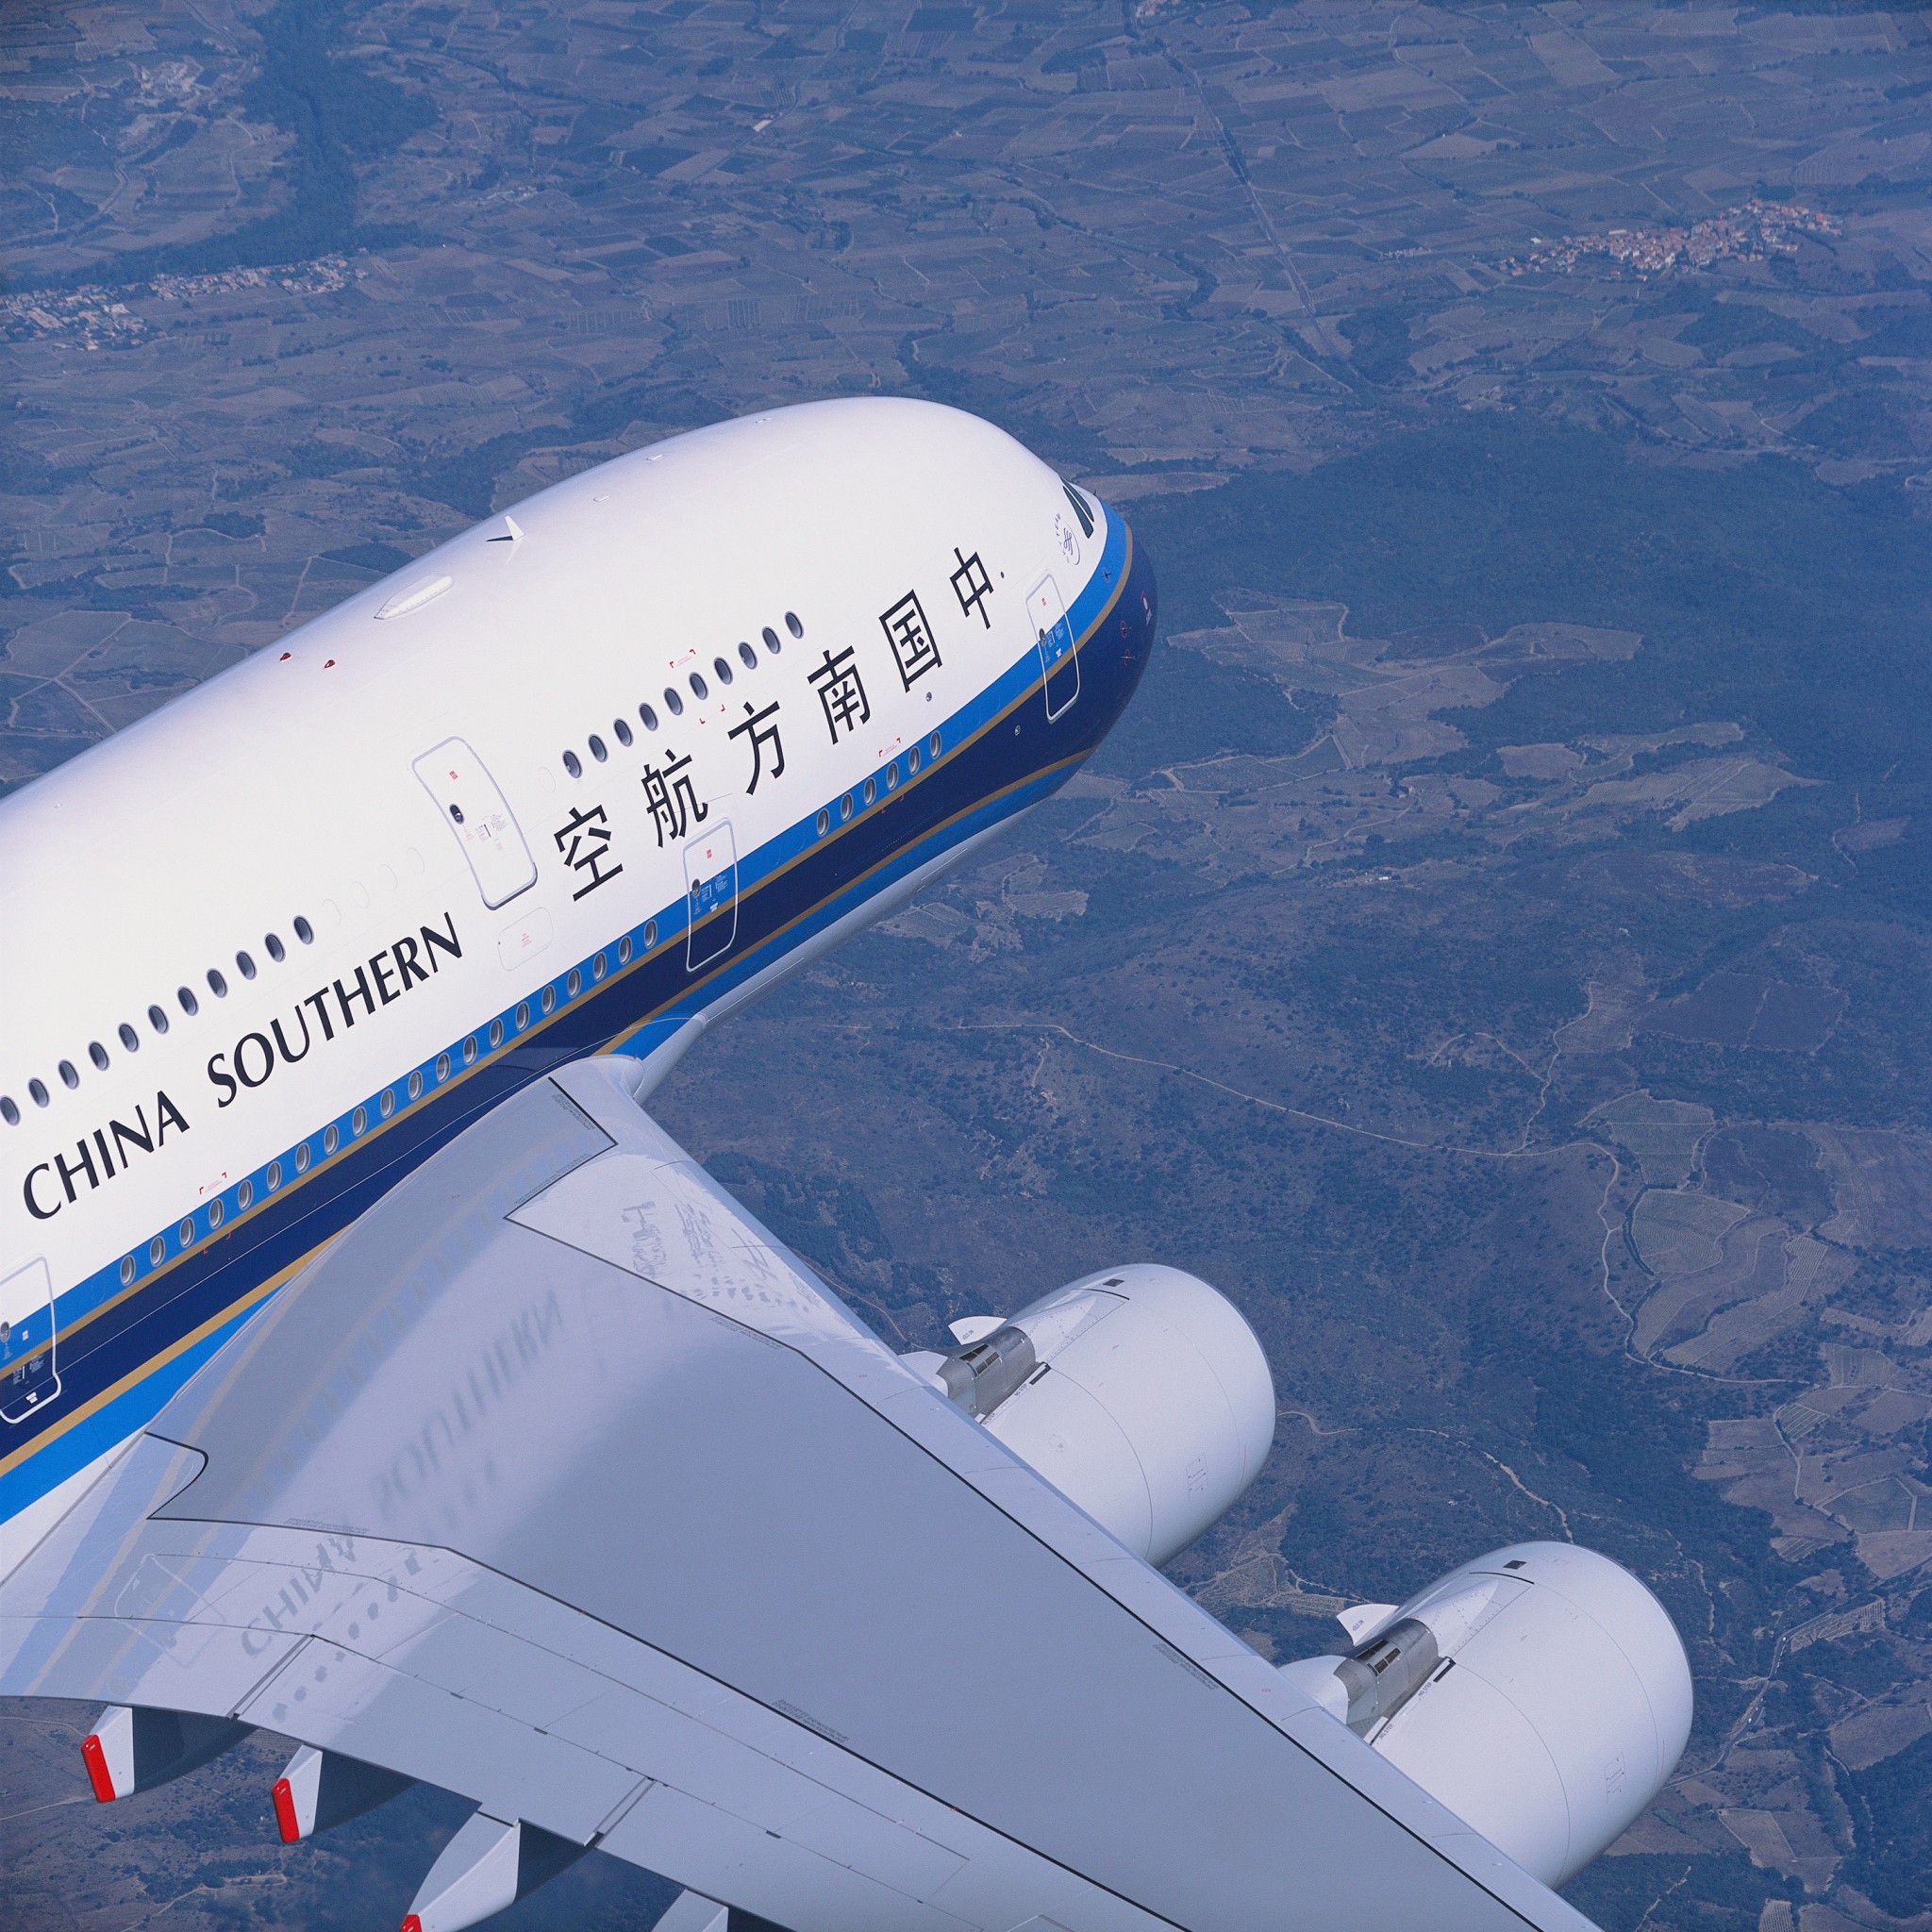 China Southern confirms American talks and stock resumes trading